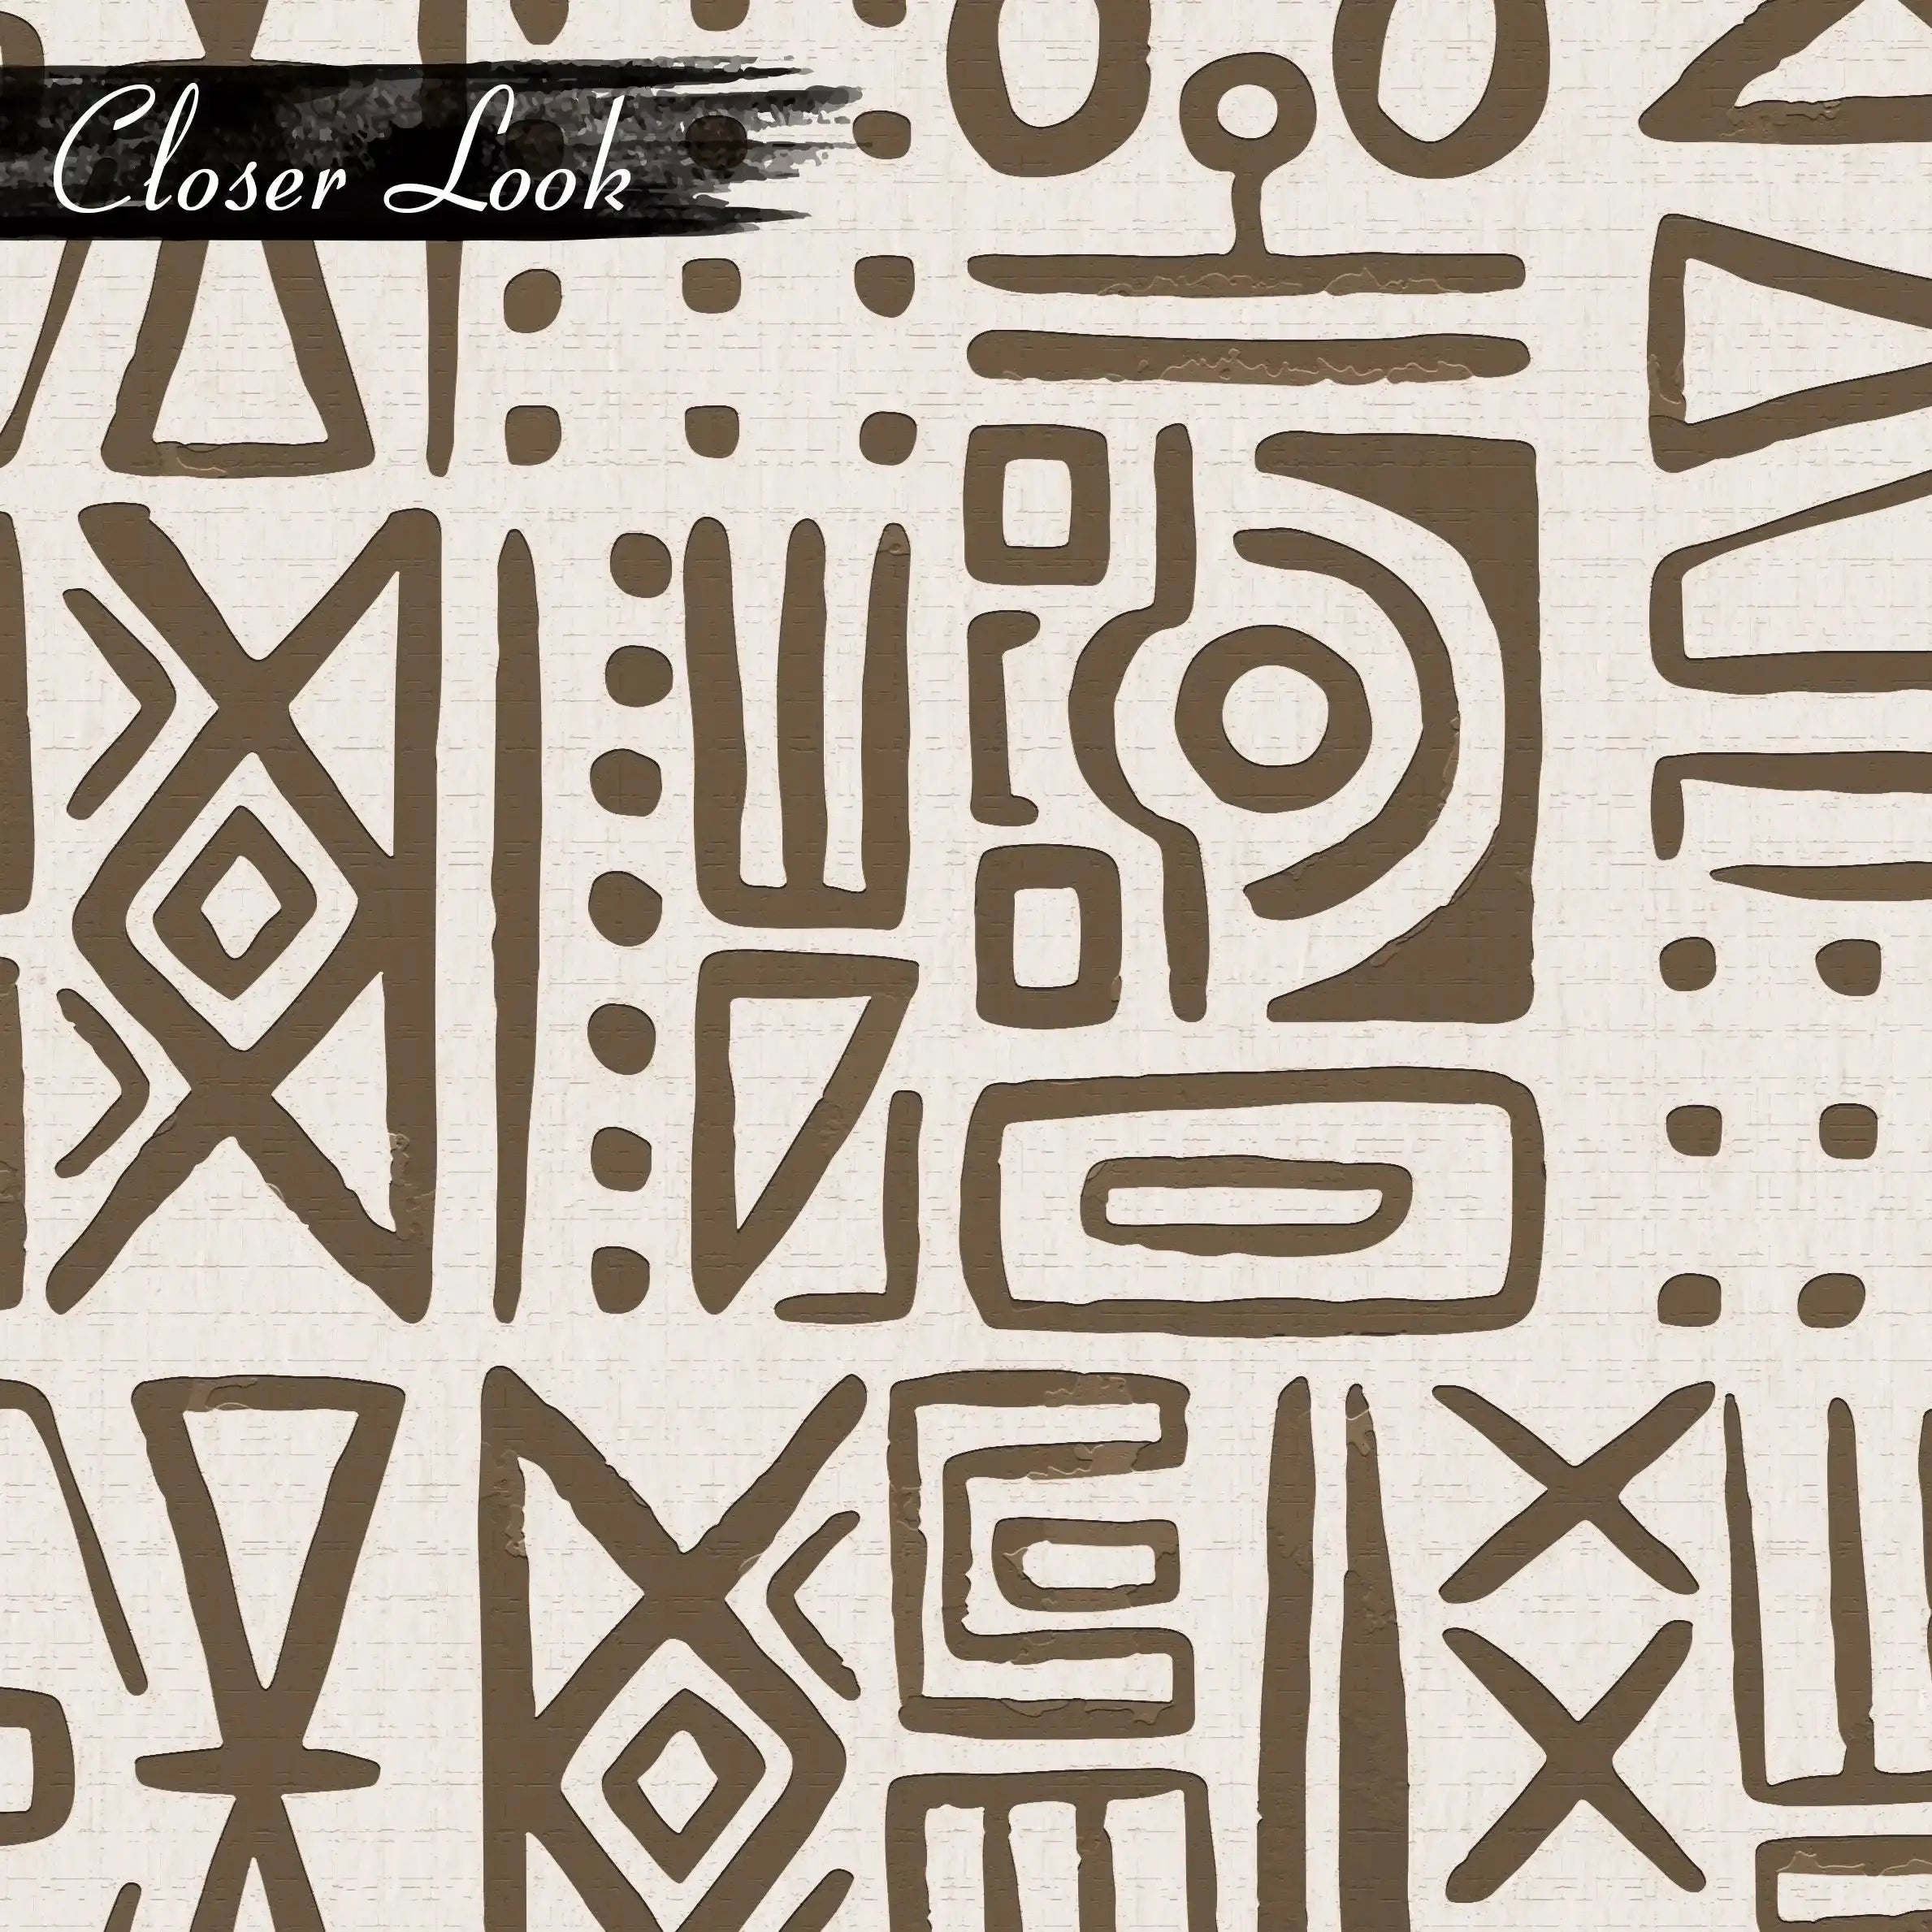 3030-D / African Inspired Peel and Stick Wallpaper, Geometric Brown and Beige Patterns Wall Mural - Artevella